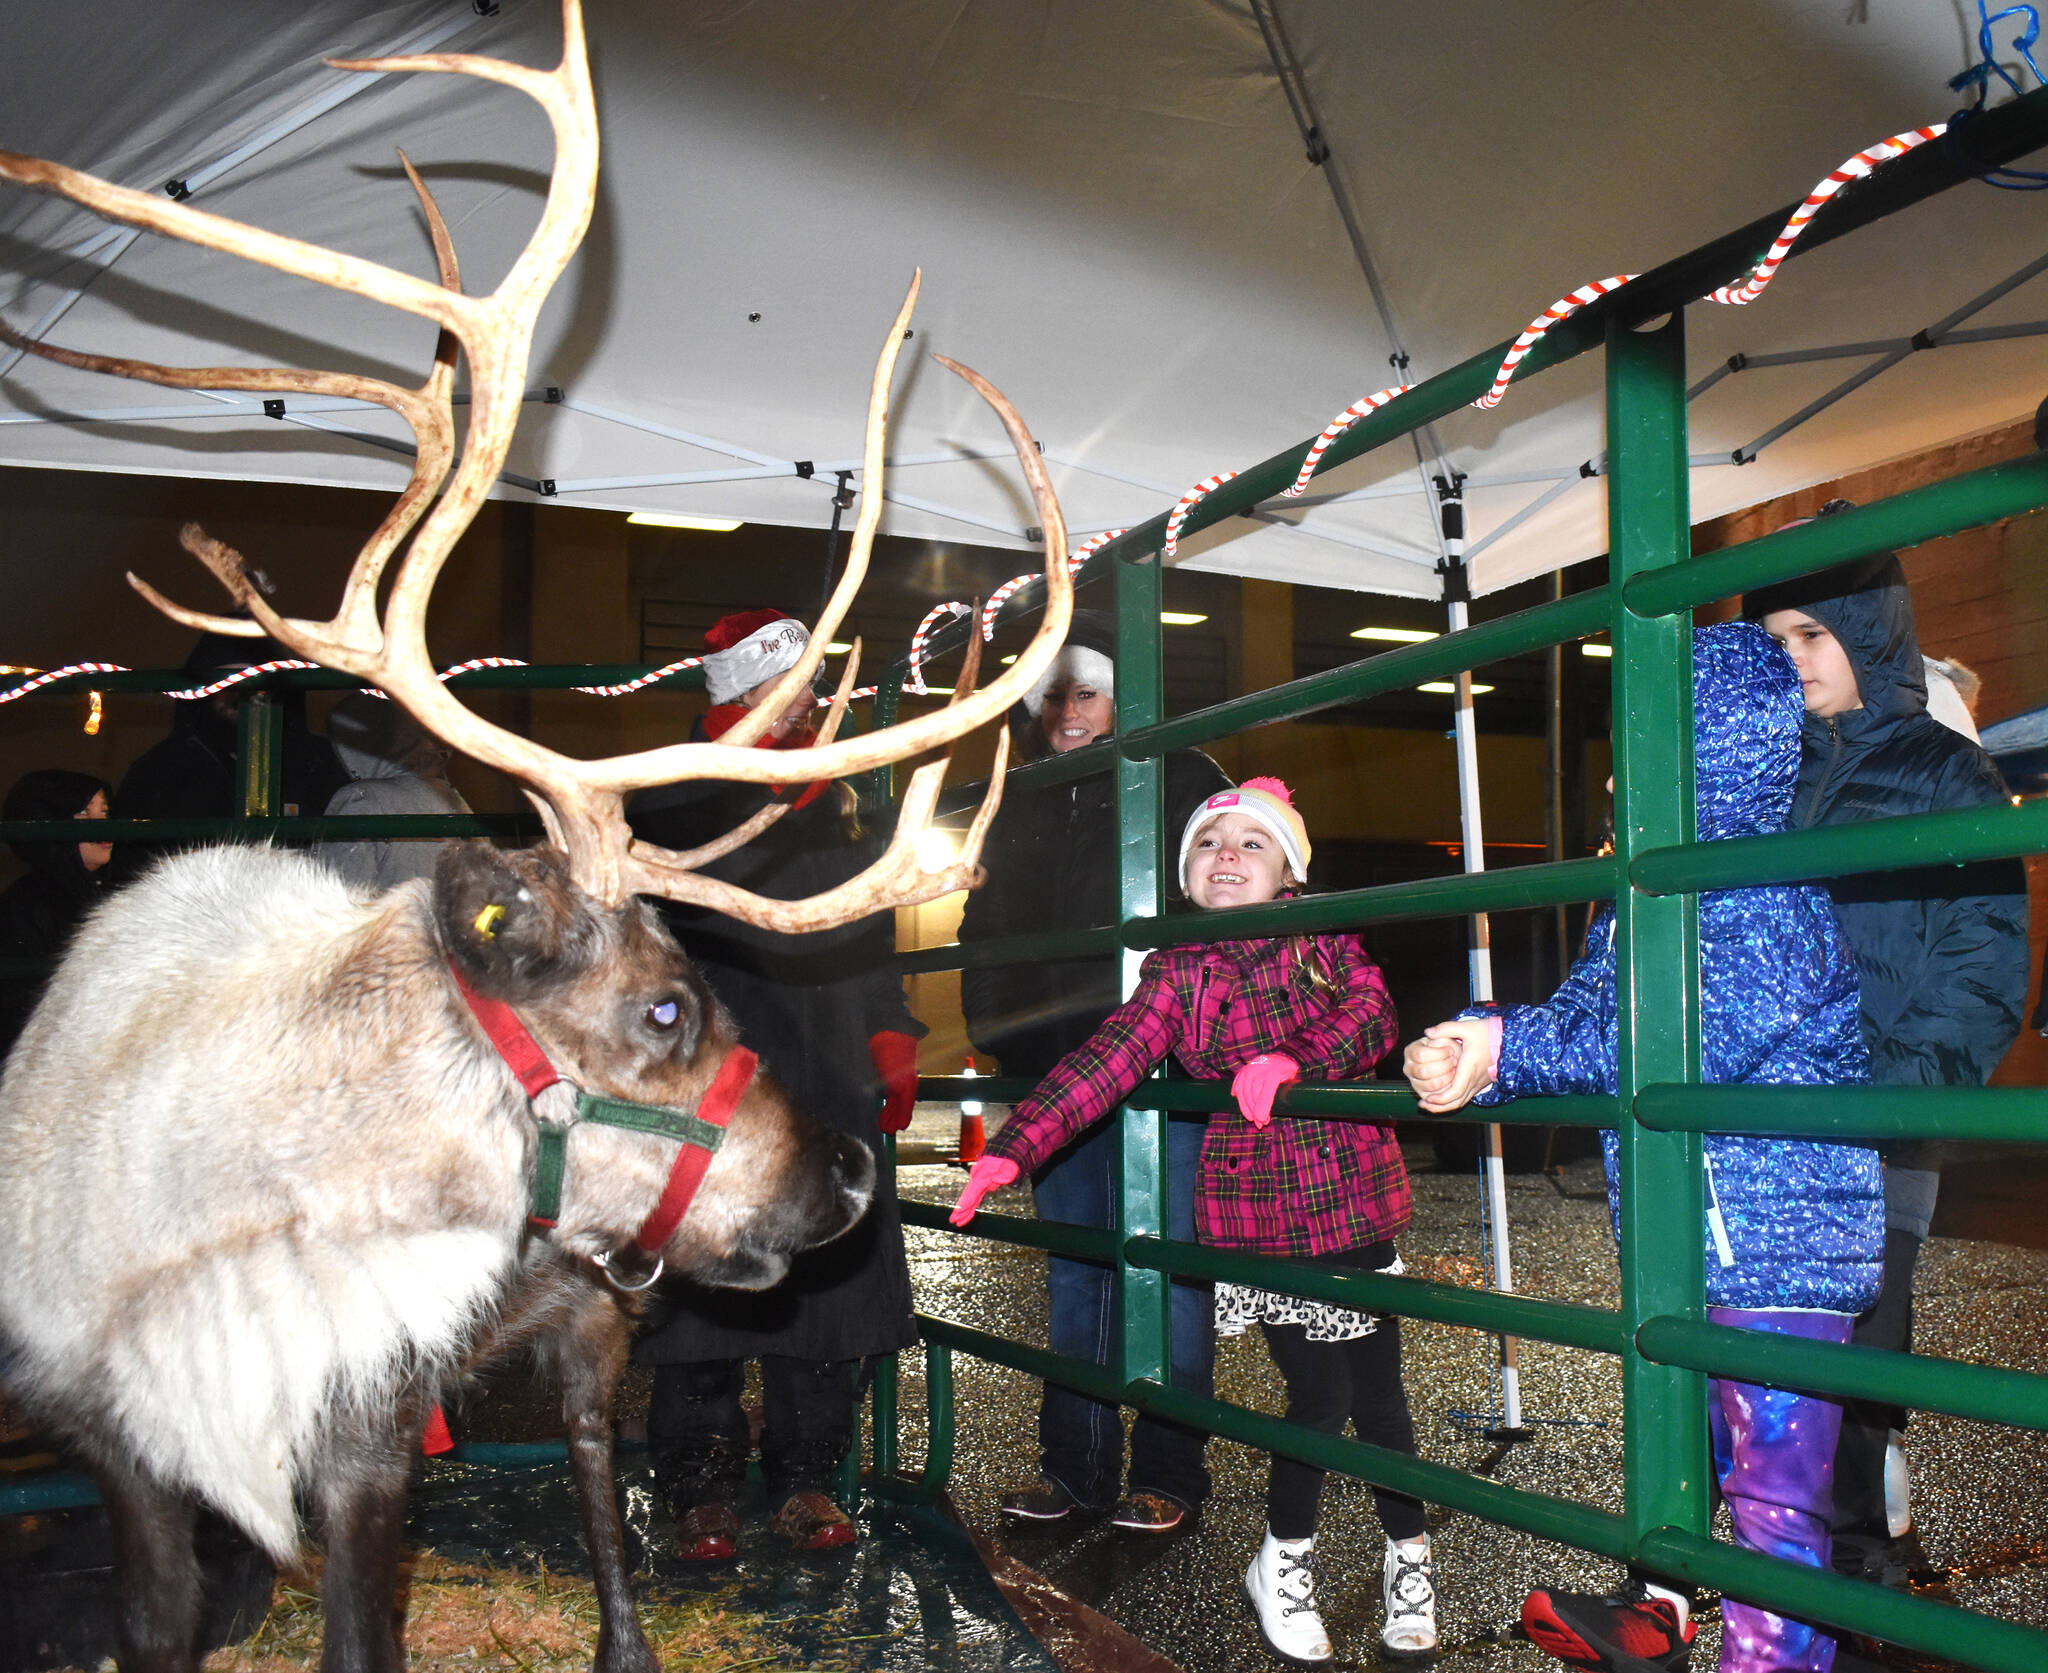 Clayton Franke / The Daily World 
Mia Bella Calene, 5, reaches to pet one the reindeer at the City Center Drug parking lot Friday evening. Despite the rain, many families showed up to take pictures and interact with the animals.